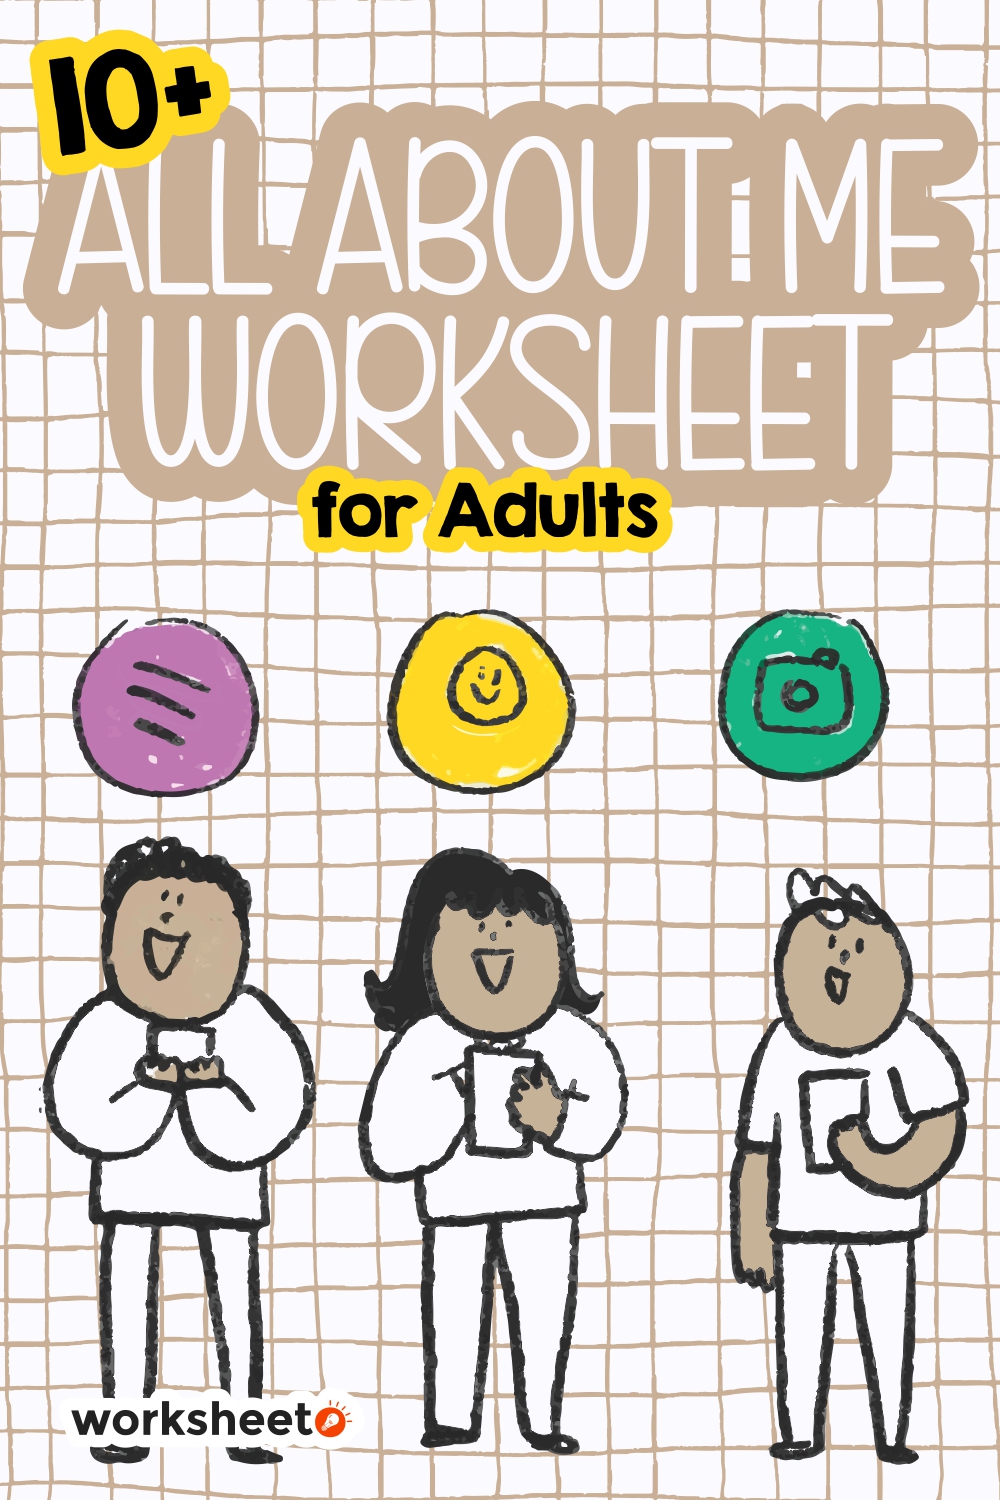 All About Me Printable Worksheet for Adults